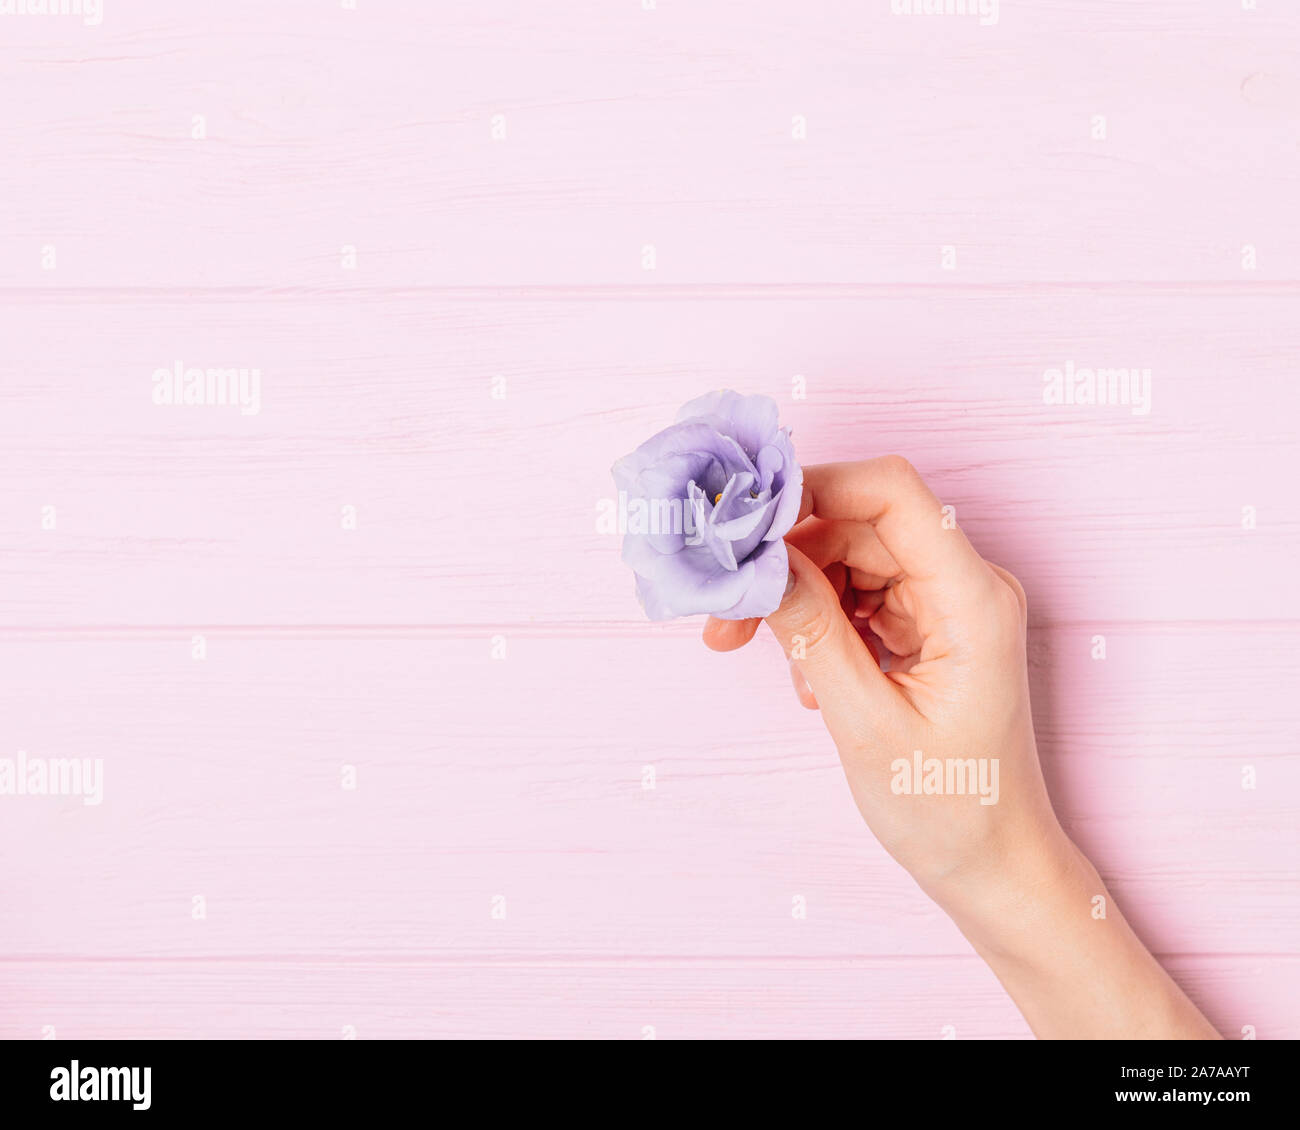 Female hand holding one purple flower lisianthus on pink wooden background, top view. Stock Photo